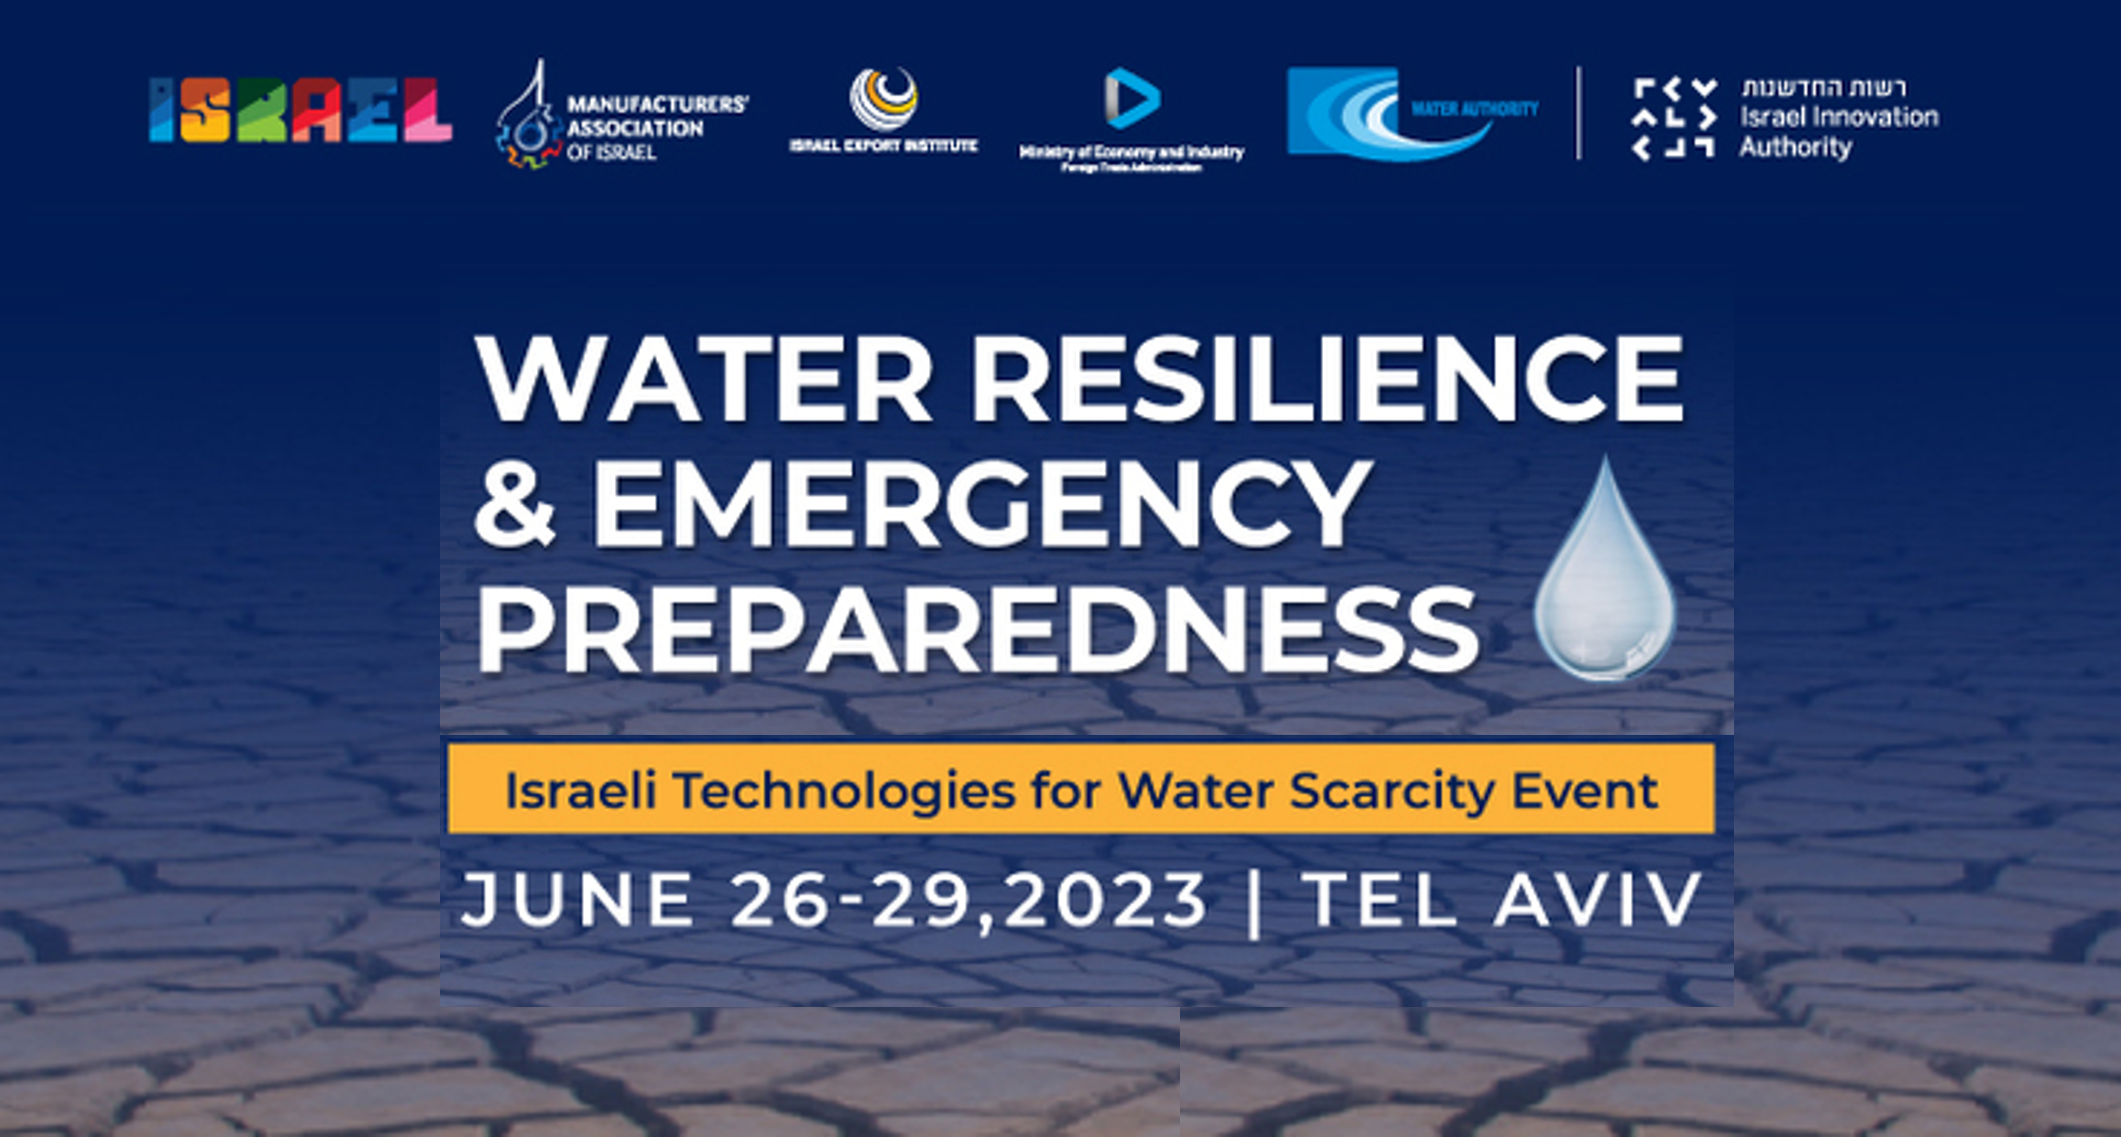 WATER RESILIENCE & EMERGENCY PREPAREDNESS EVENT 2023